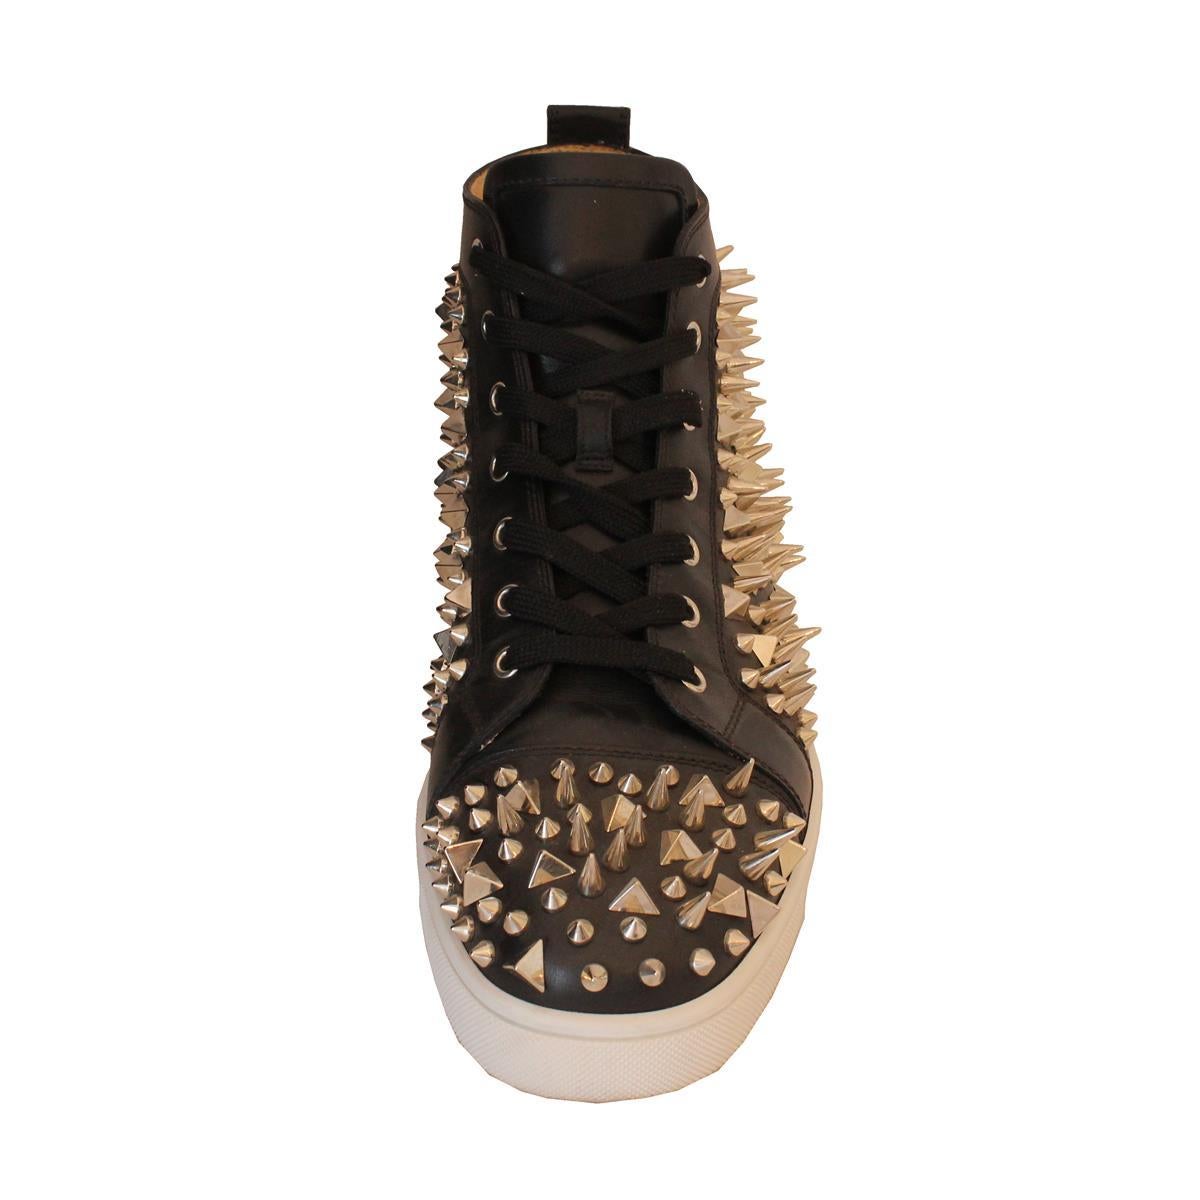 christian louboutin studded sneakers